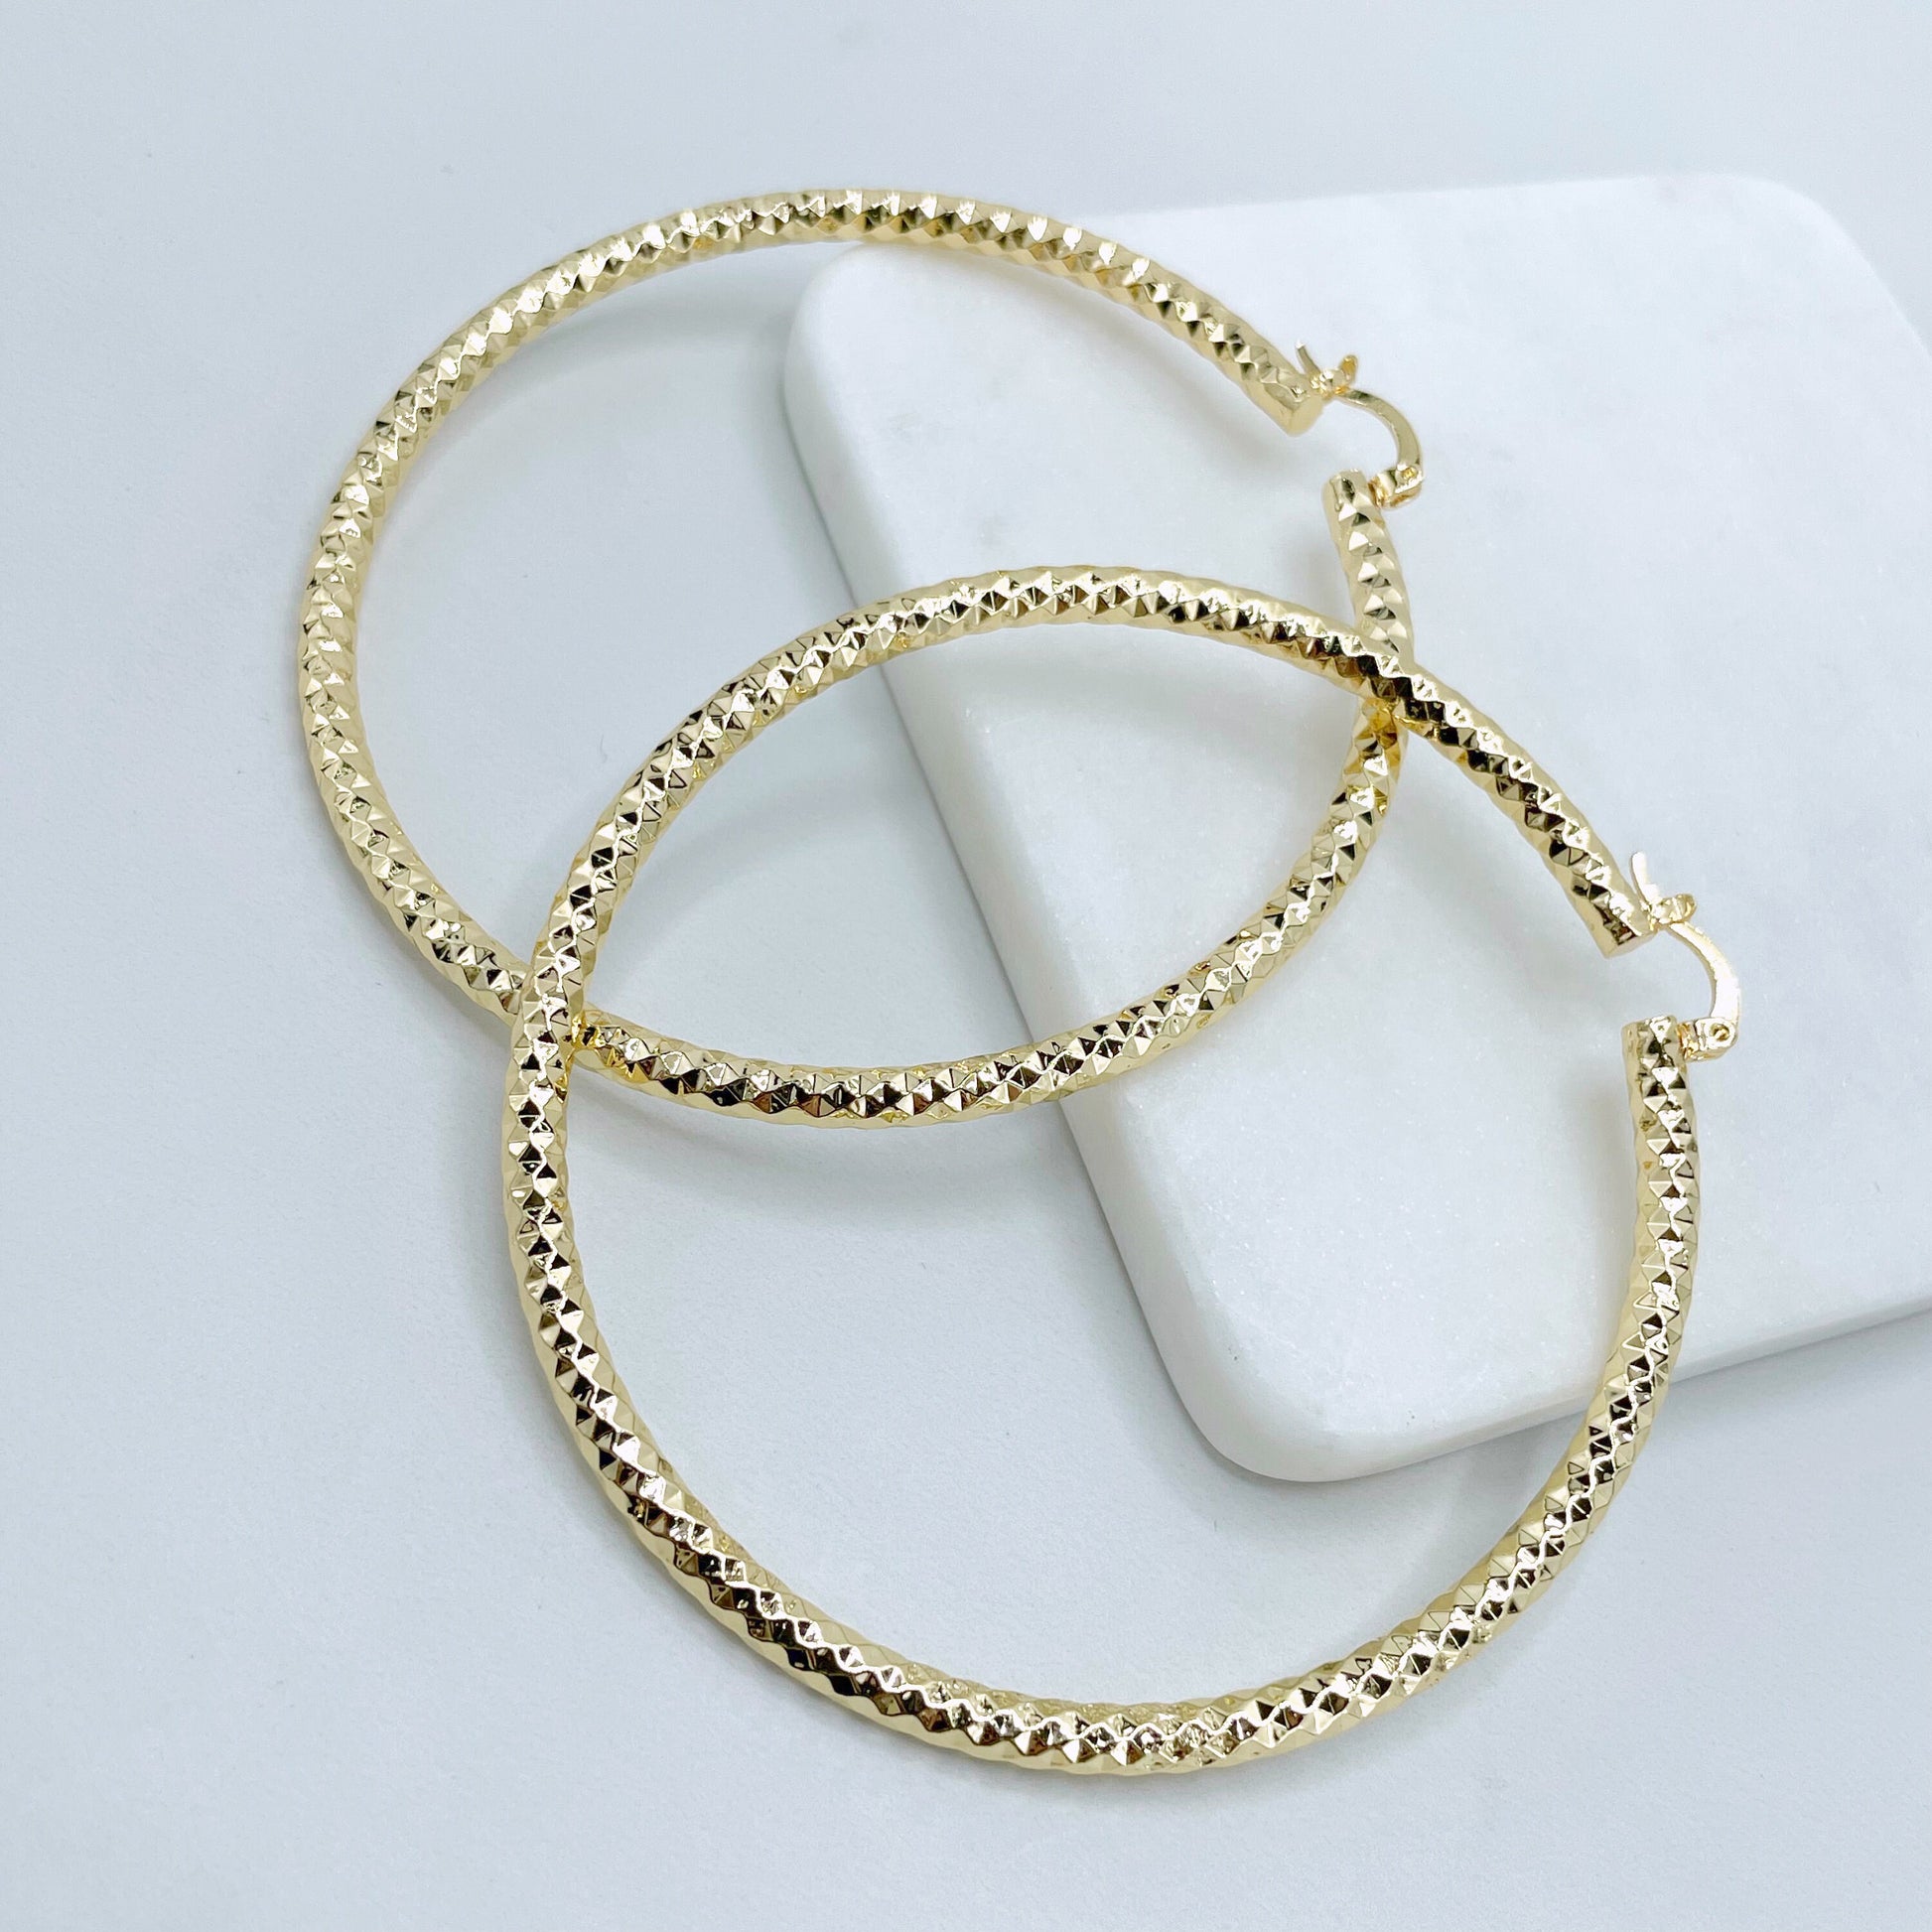 18k Gold Filled 77mm Textured Hoops Earrings, 4mm Thickness Wholesale Jewelry Making Supplies